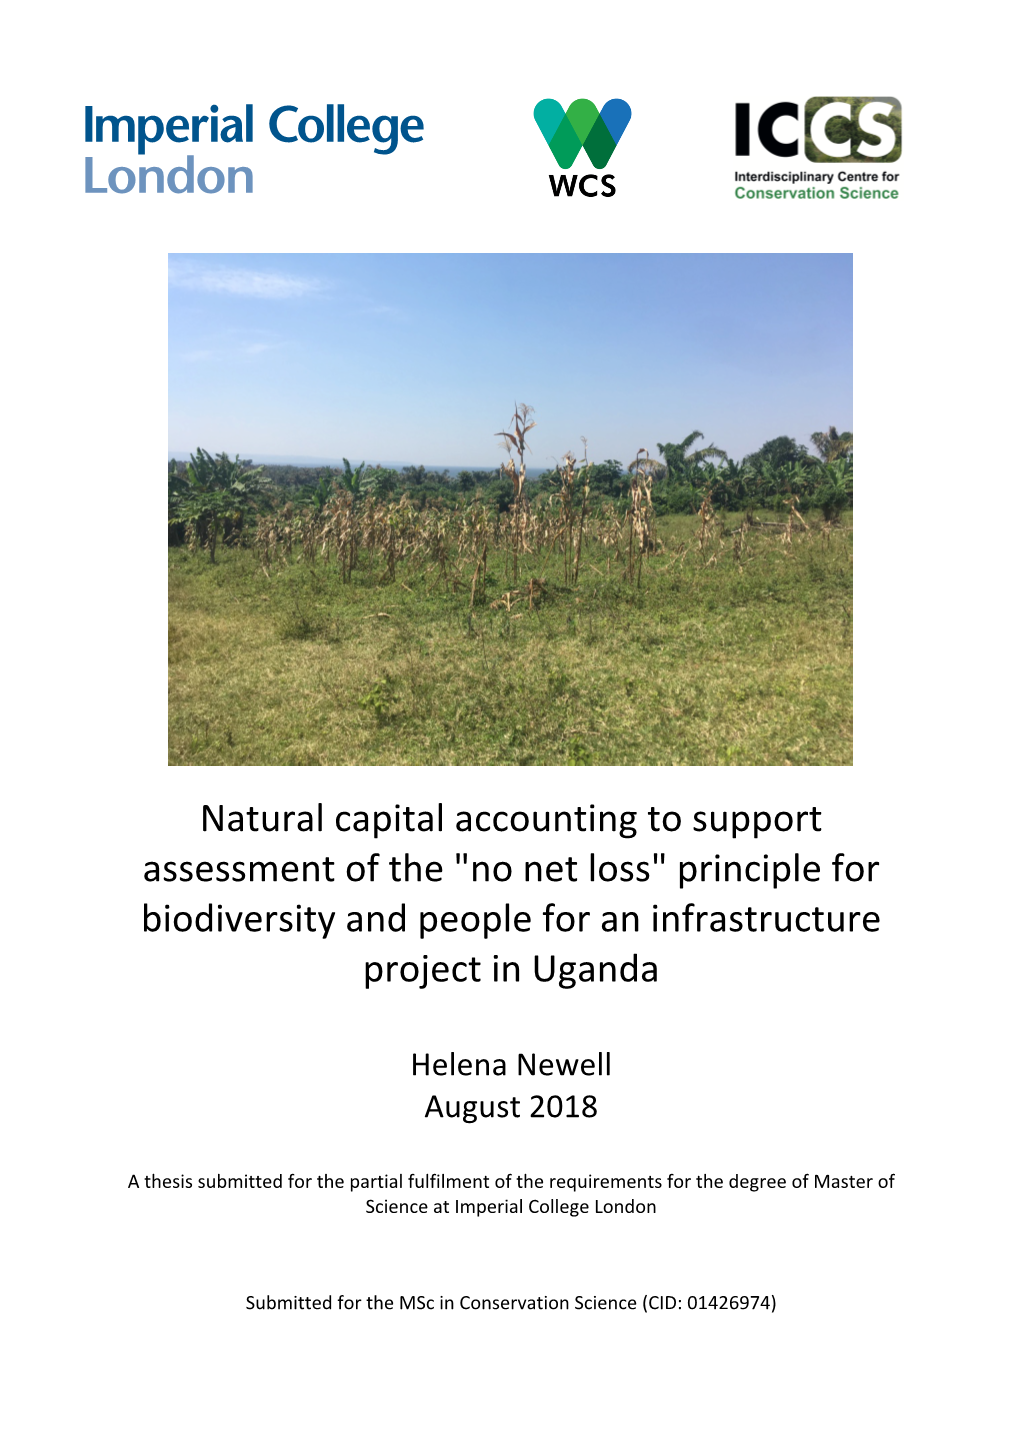 Natural Capital Accounting to Support Assessment of the "No Net Loss" Principle for Biodiversity and People for an Infrastructure Project in Uganda